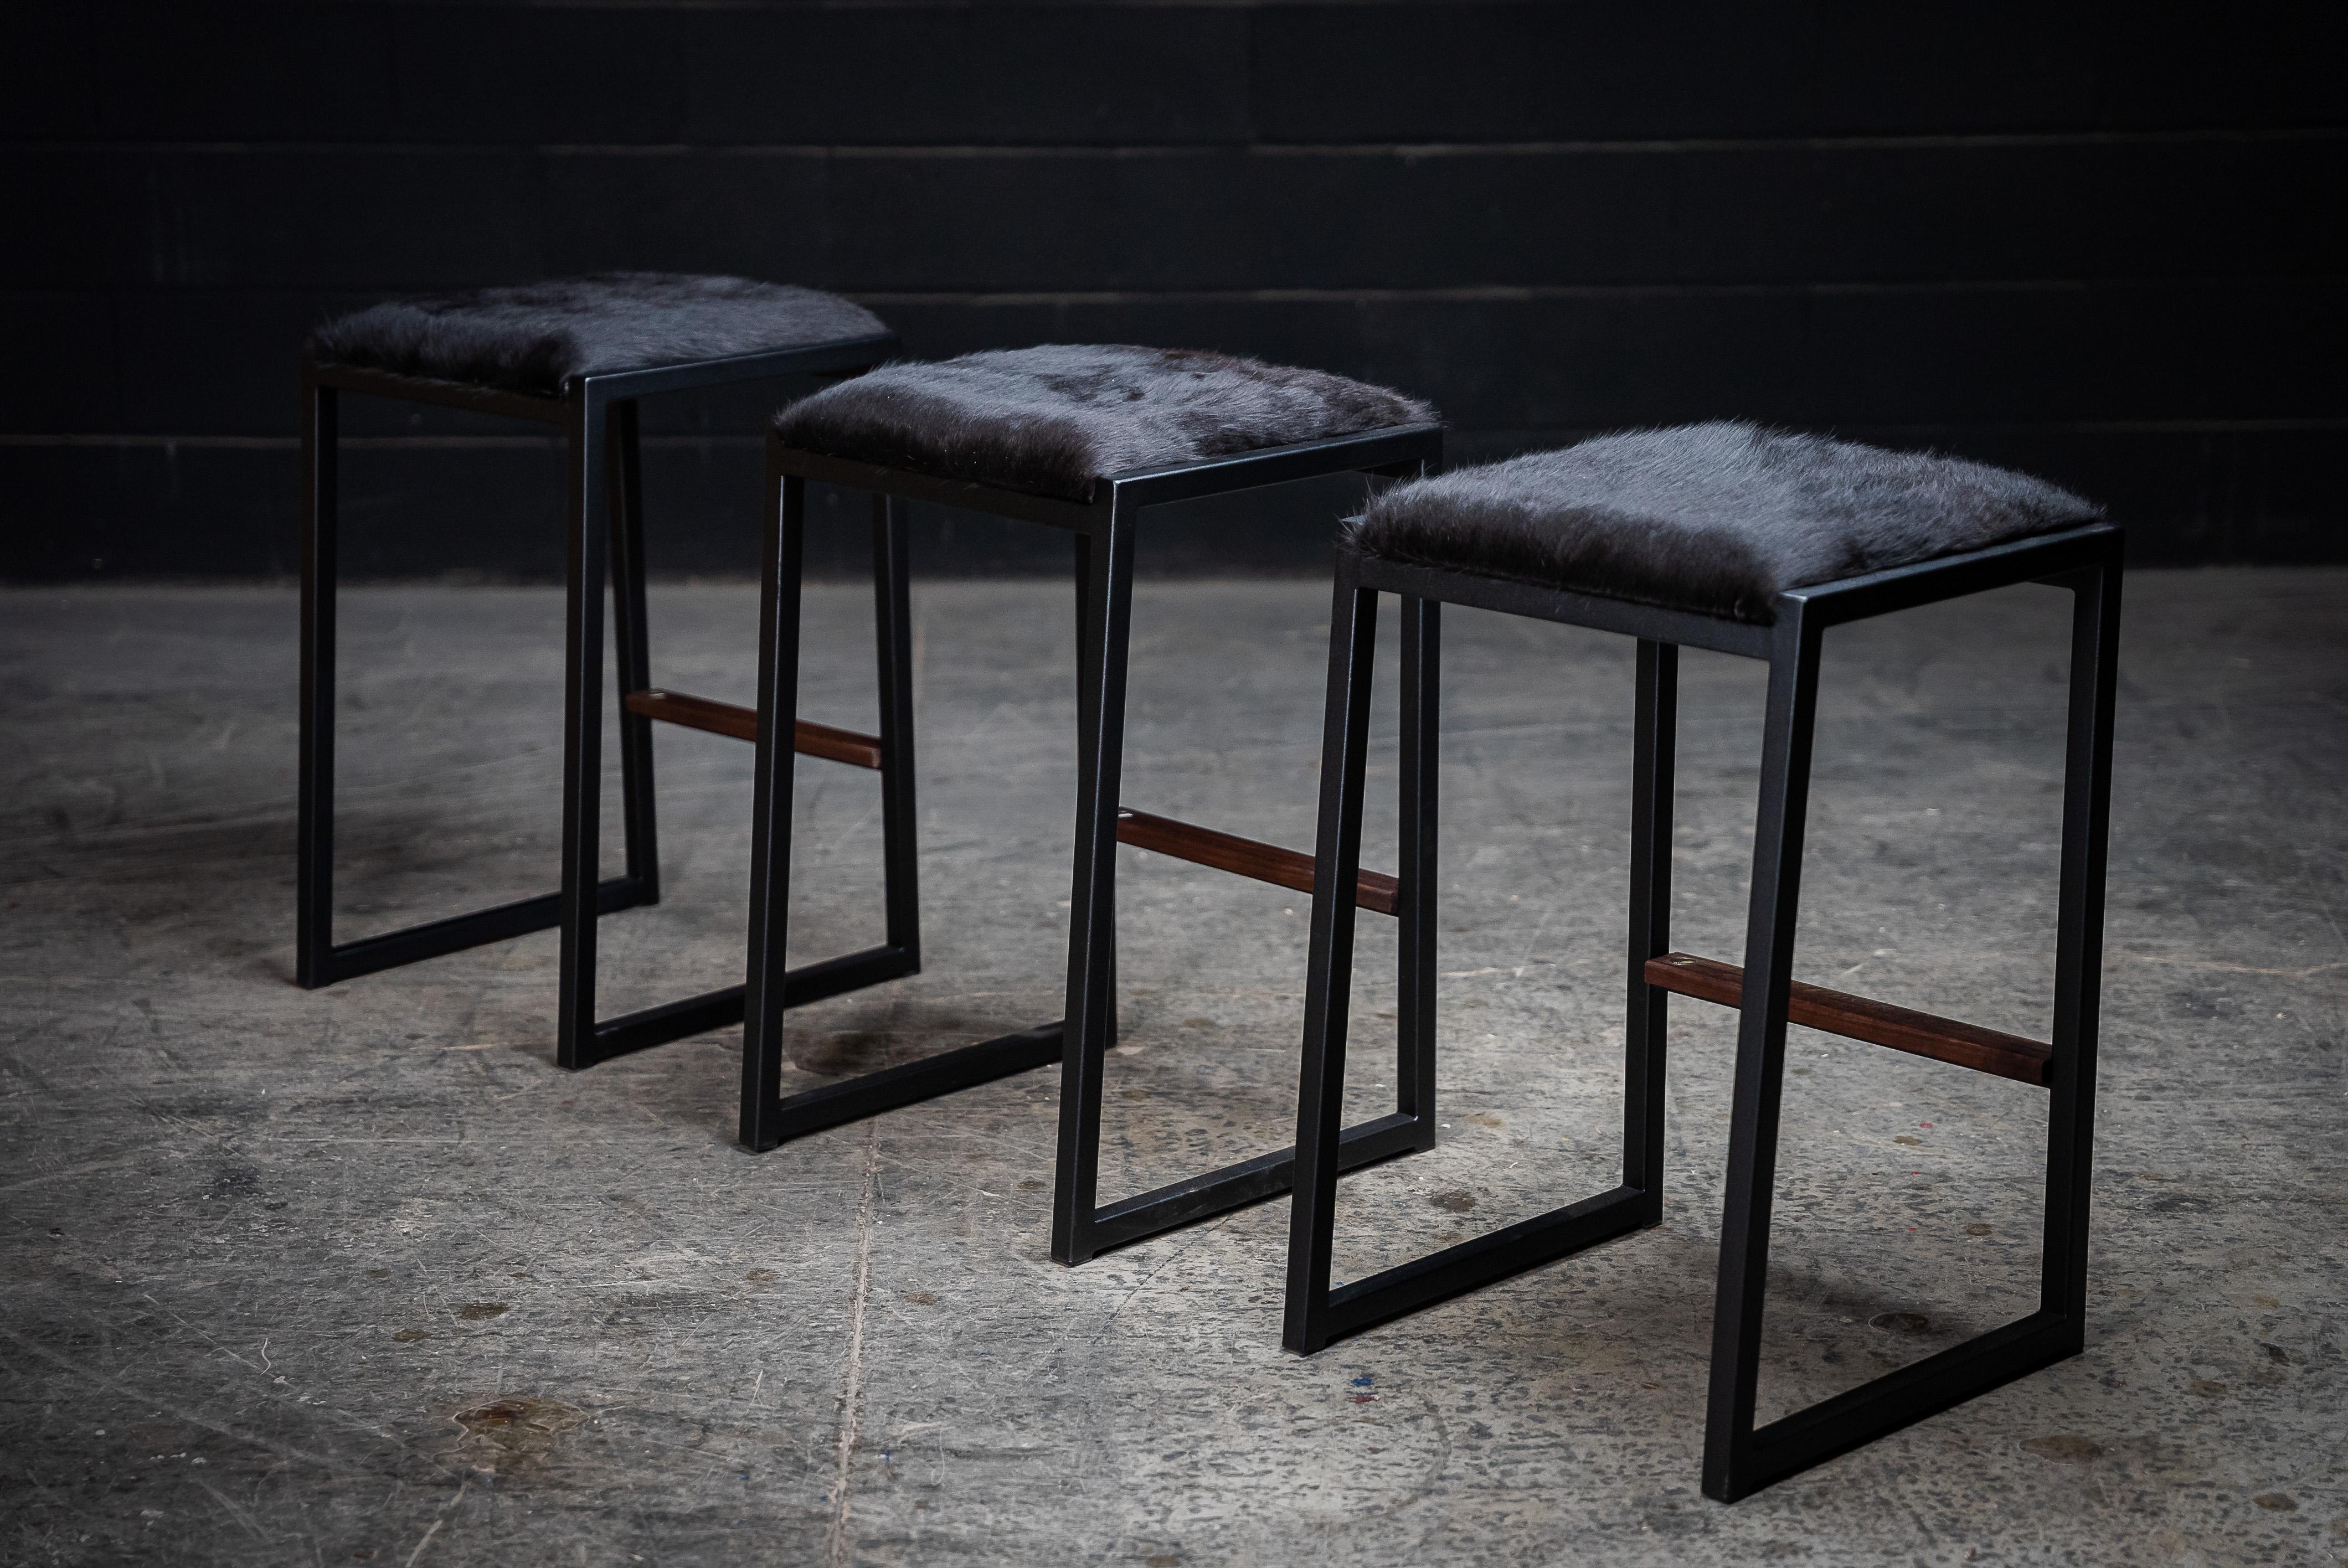 3x Shaker Modern Backless Stool by Ambrozia, Black Cowhide, Walnut & Black Steel In New Condition For Sale In Drummondville, Quebec